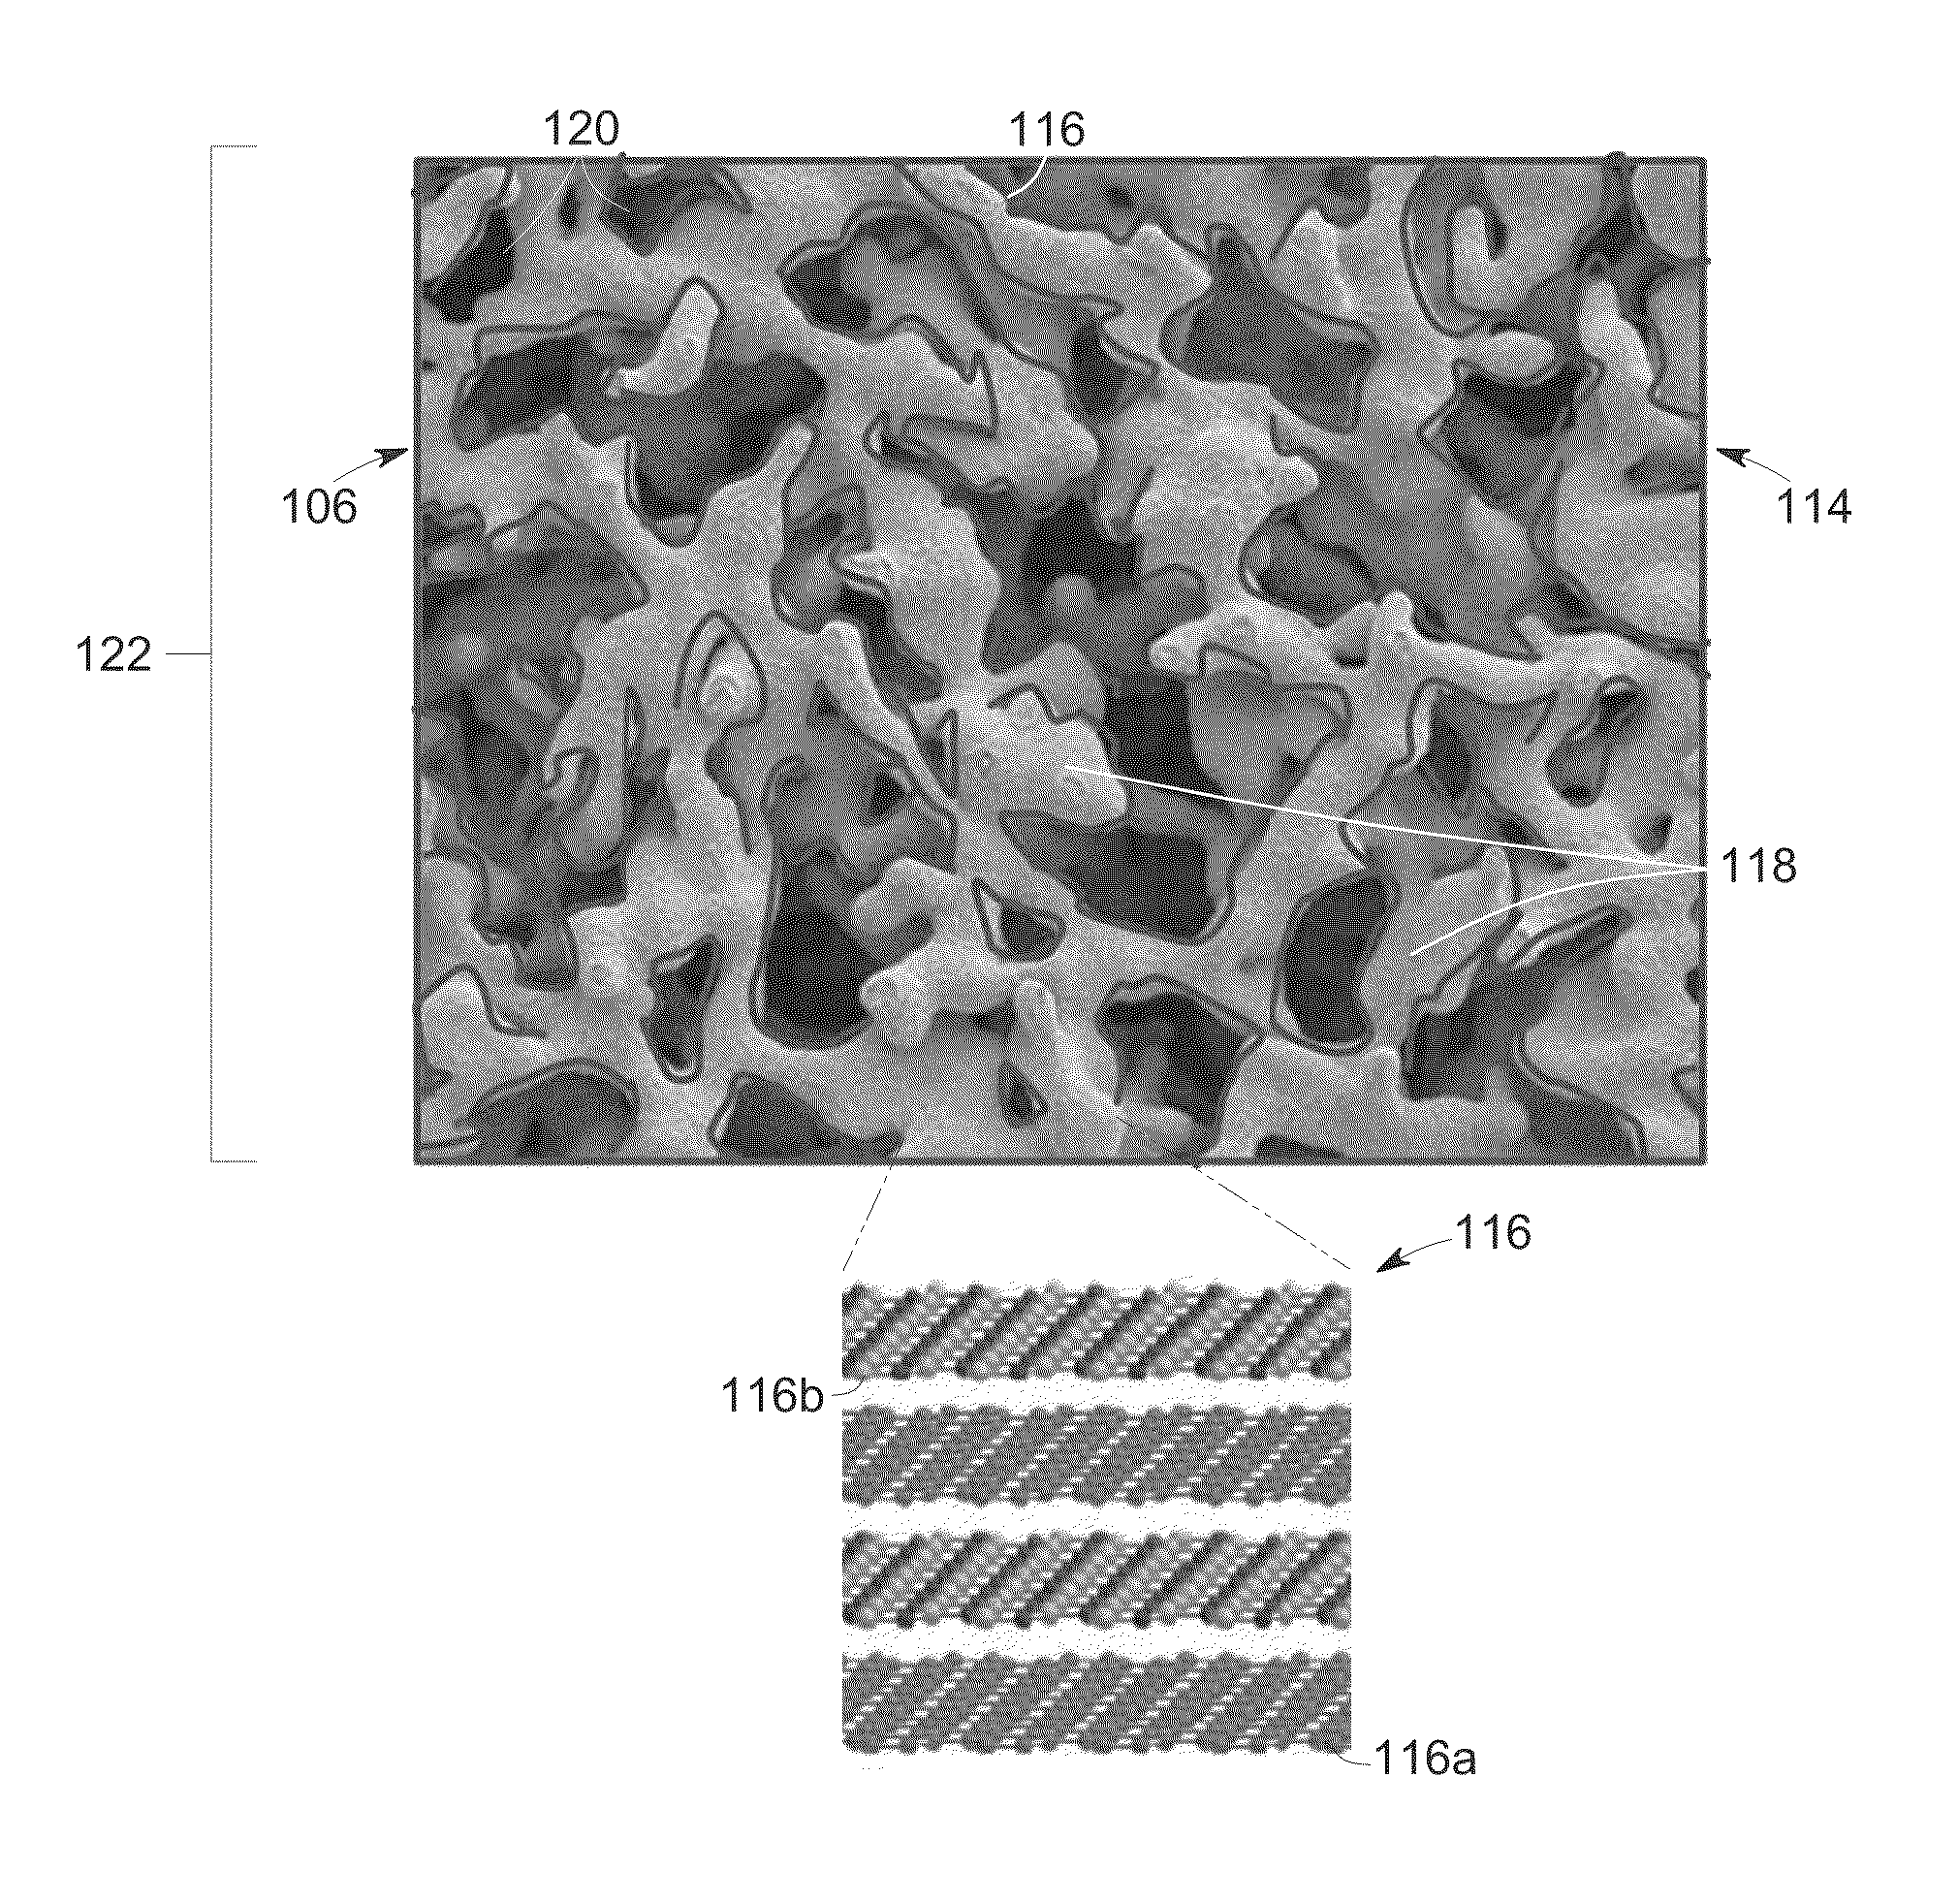 High specific area composite foam and an associated method of fabrication